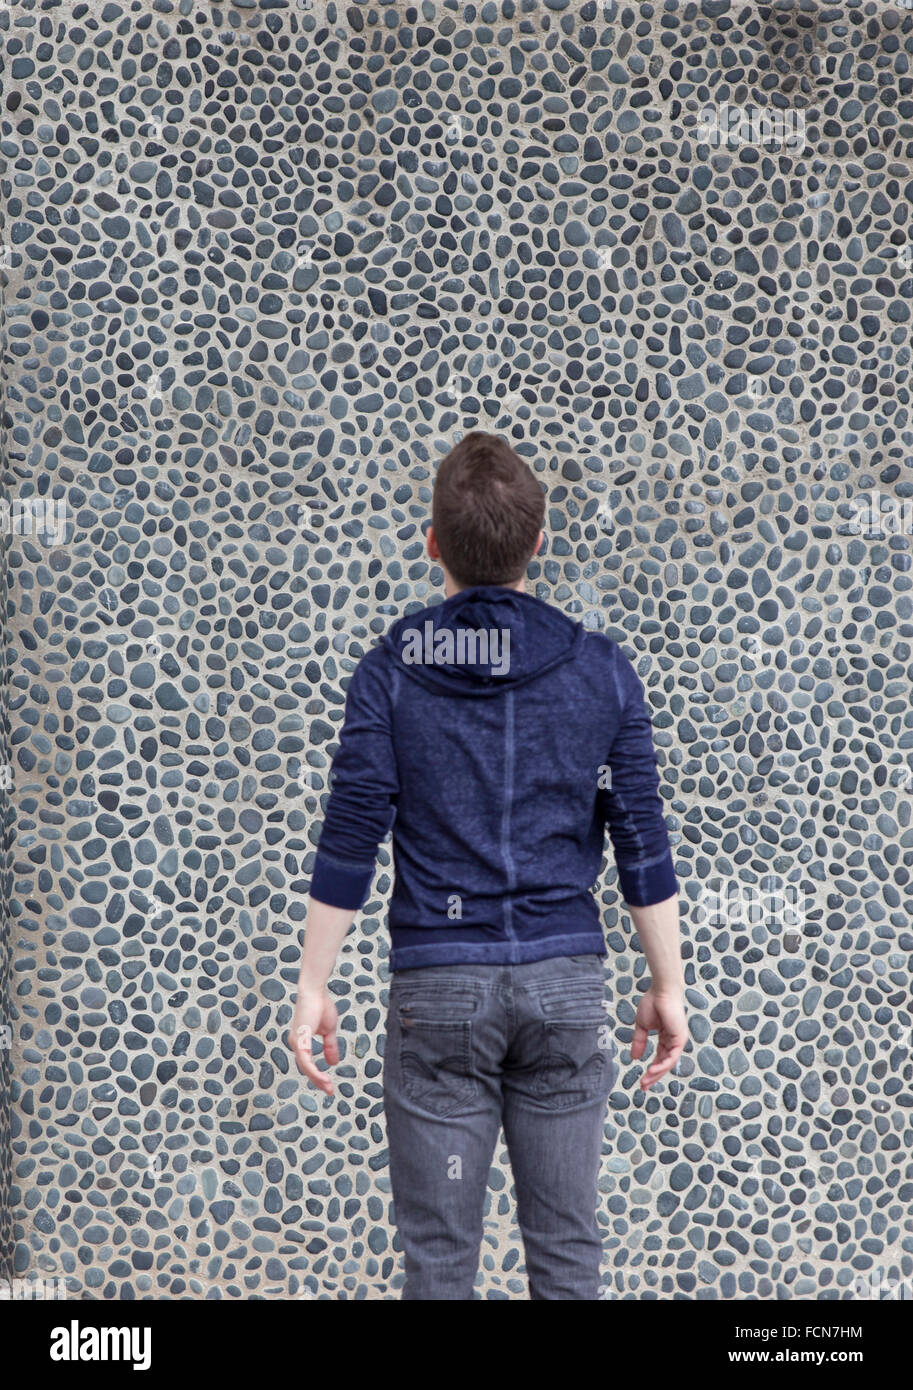 man looks at wall full of small stones in busy pattern Stock Photo